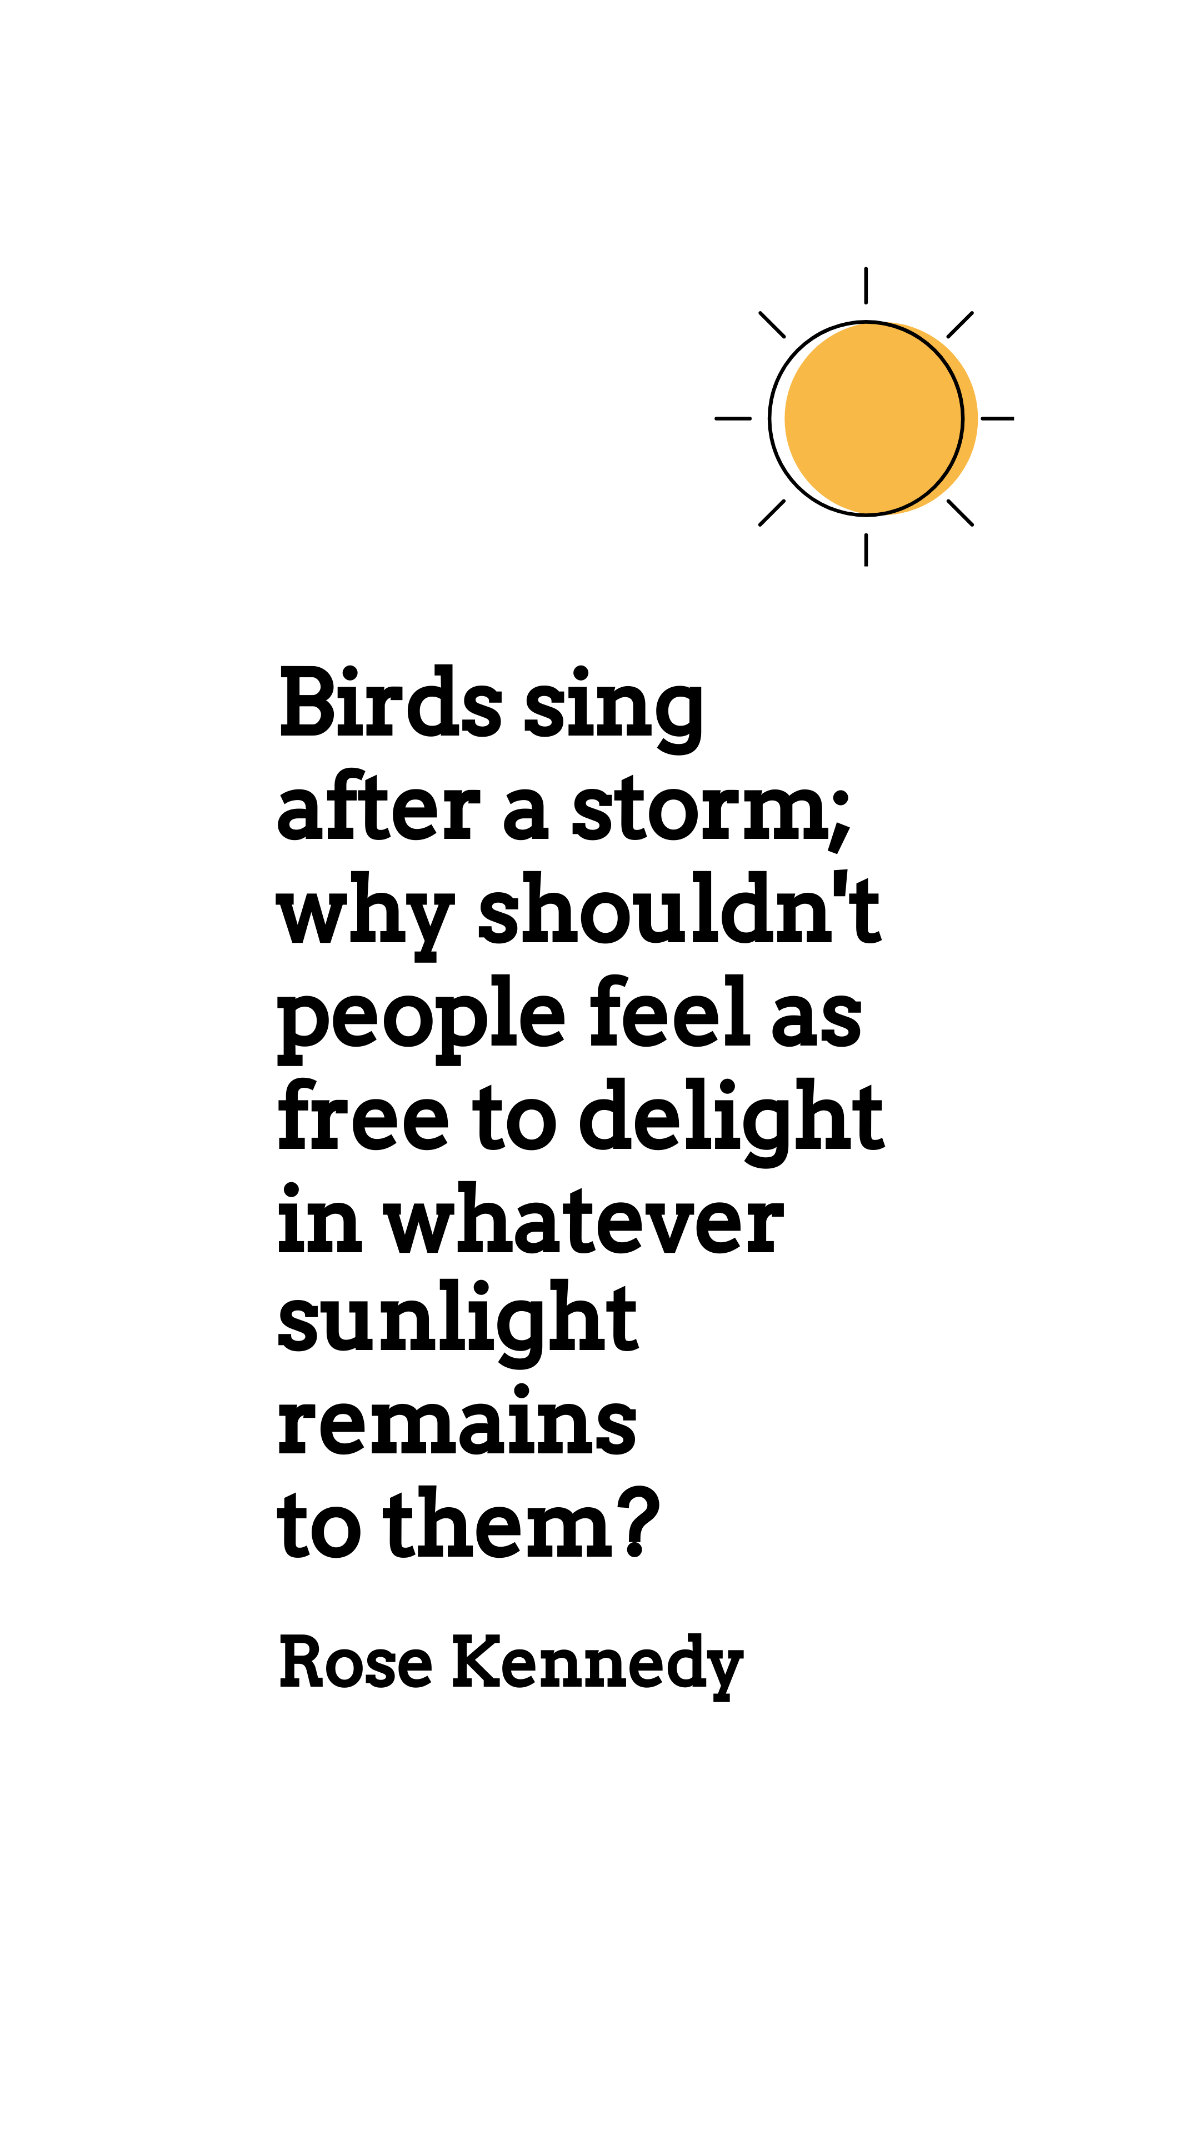 Rose Kennedy - Birds sing after a storm; why shouldn't people feel as to delight in whatever sunlight remains to them?